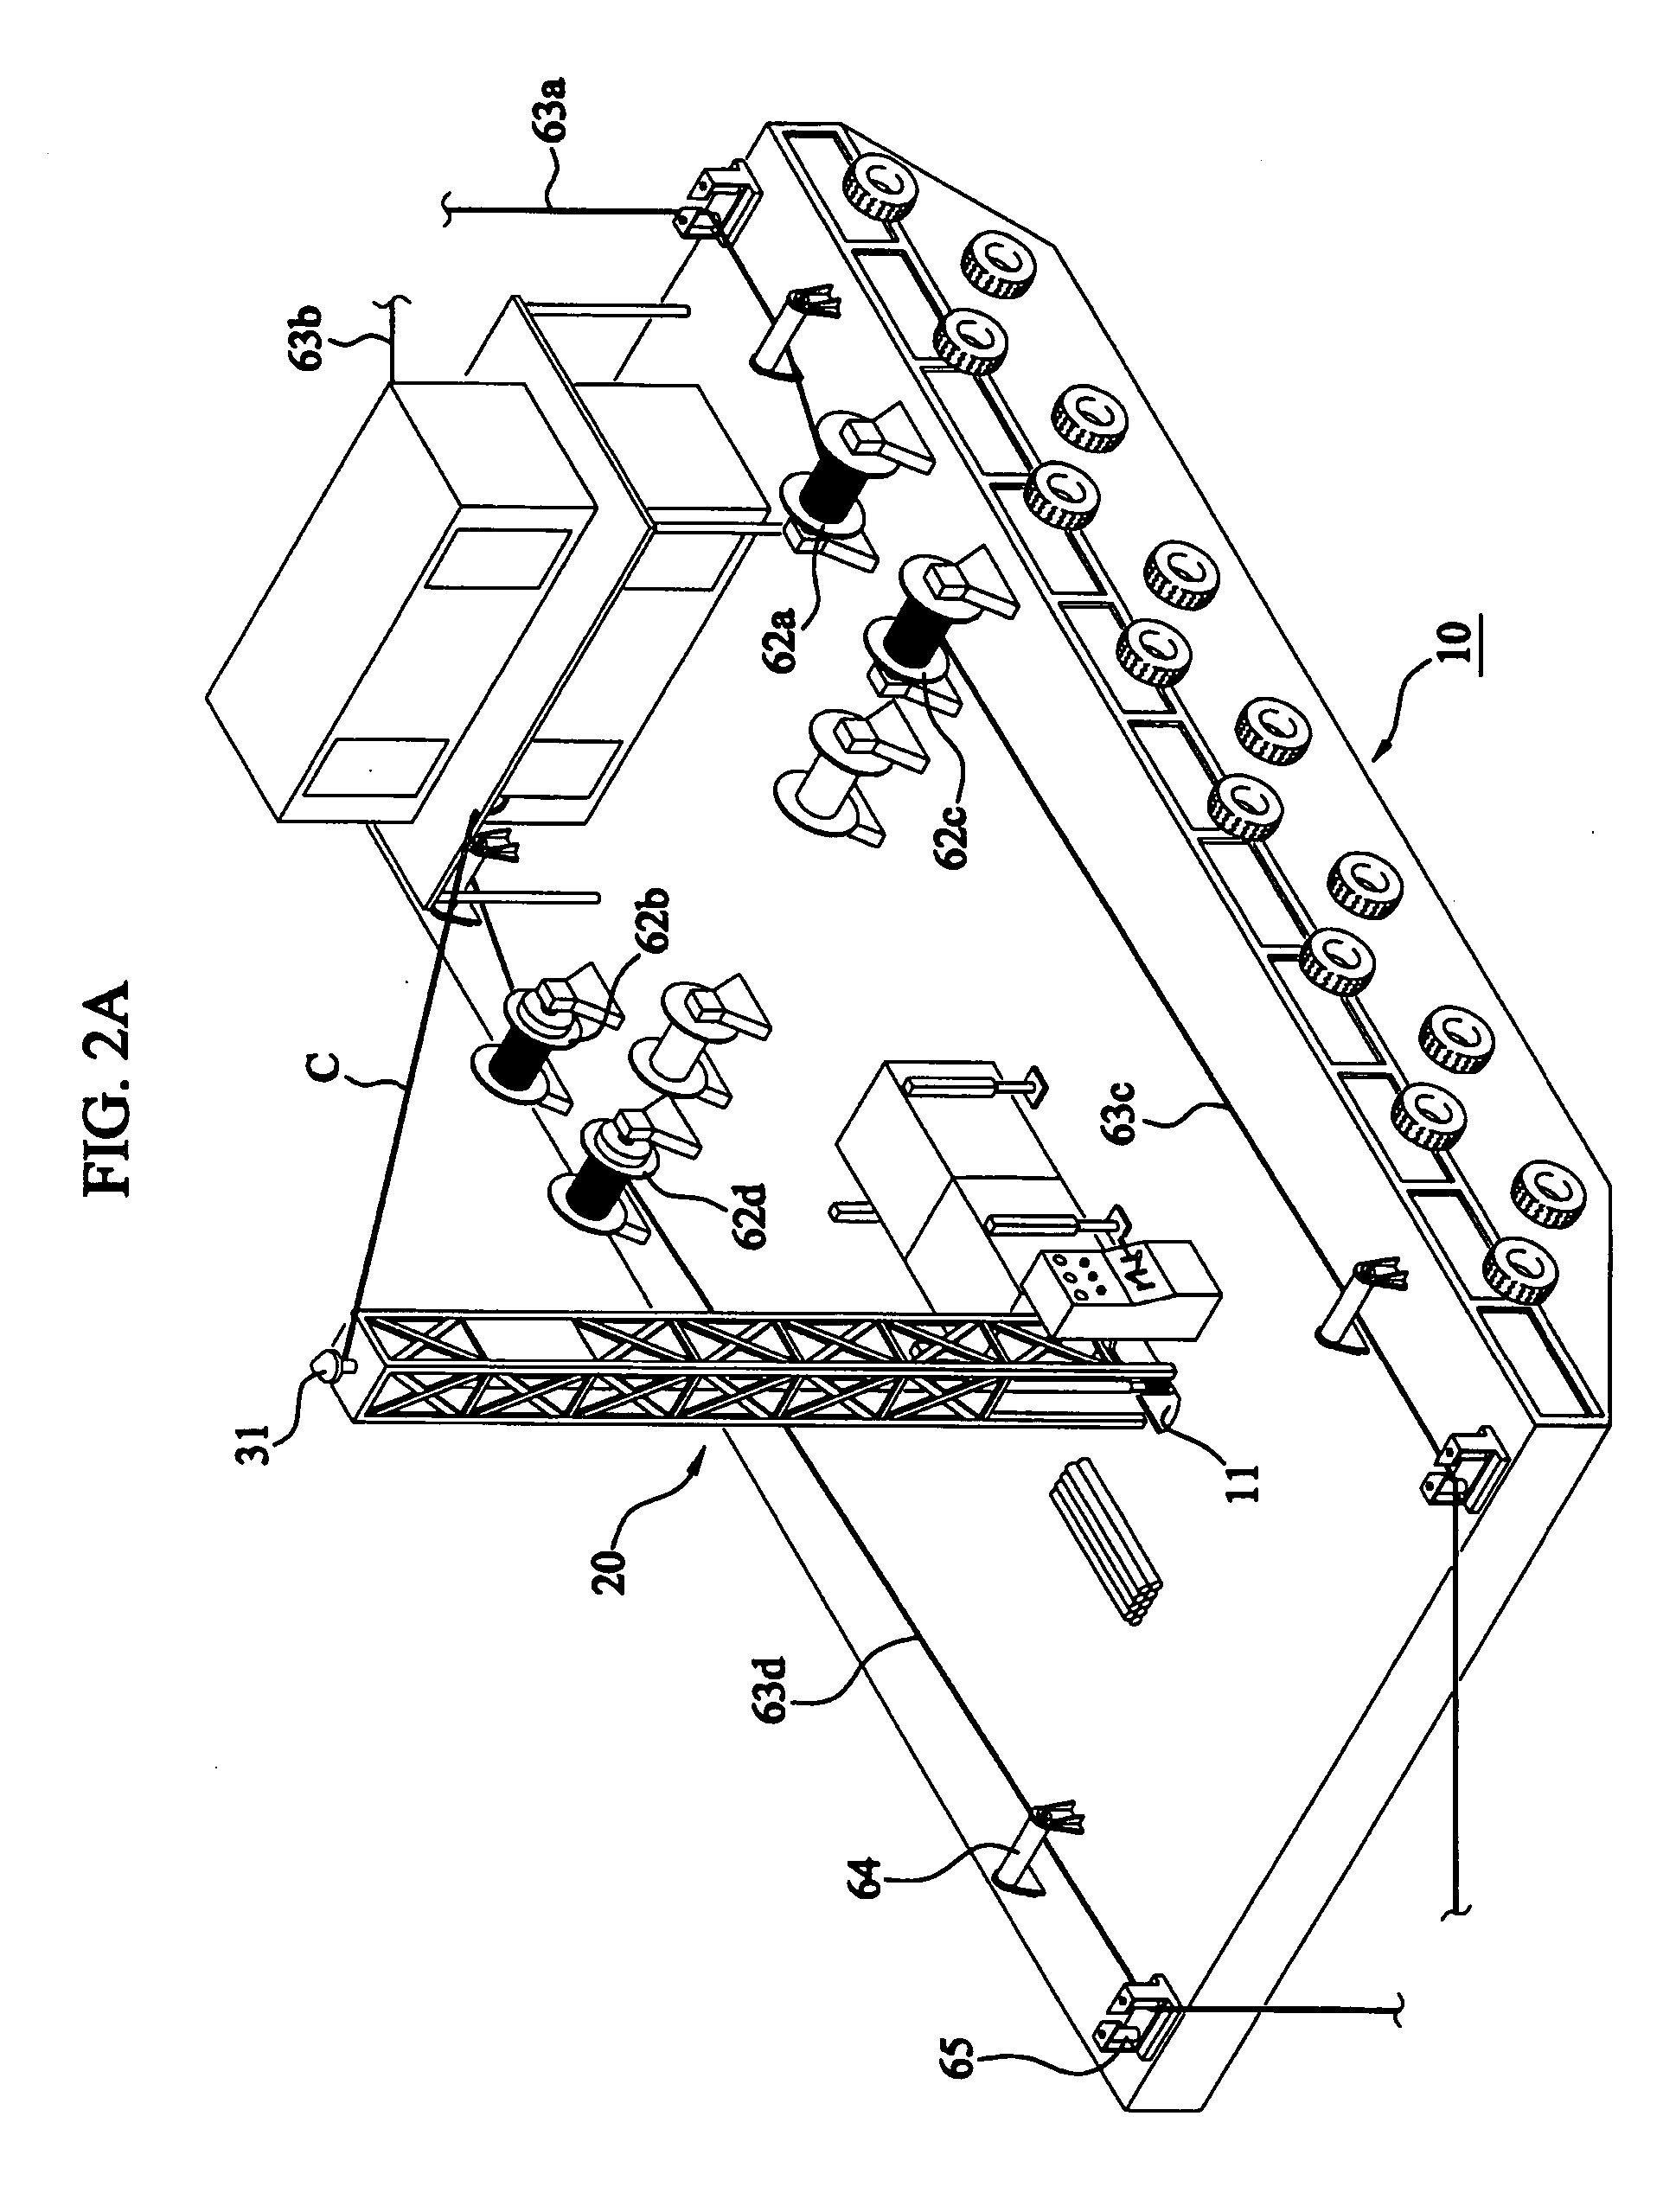 Boring machine having differential global positioning system receiver for underwater rock and boring method thereof